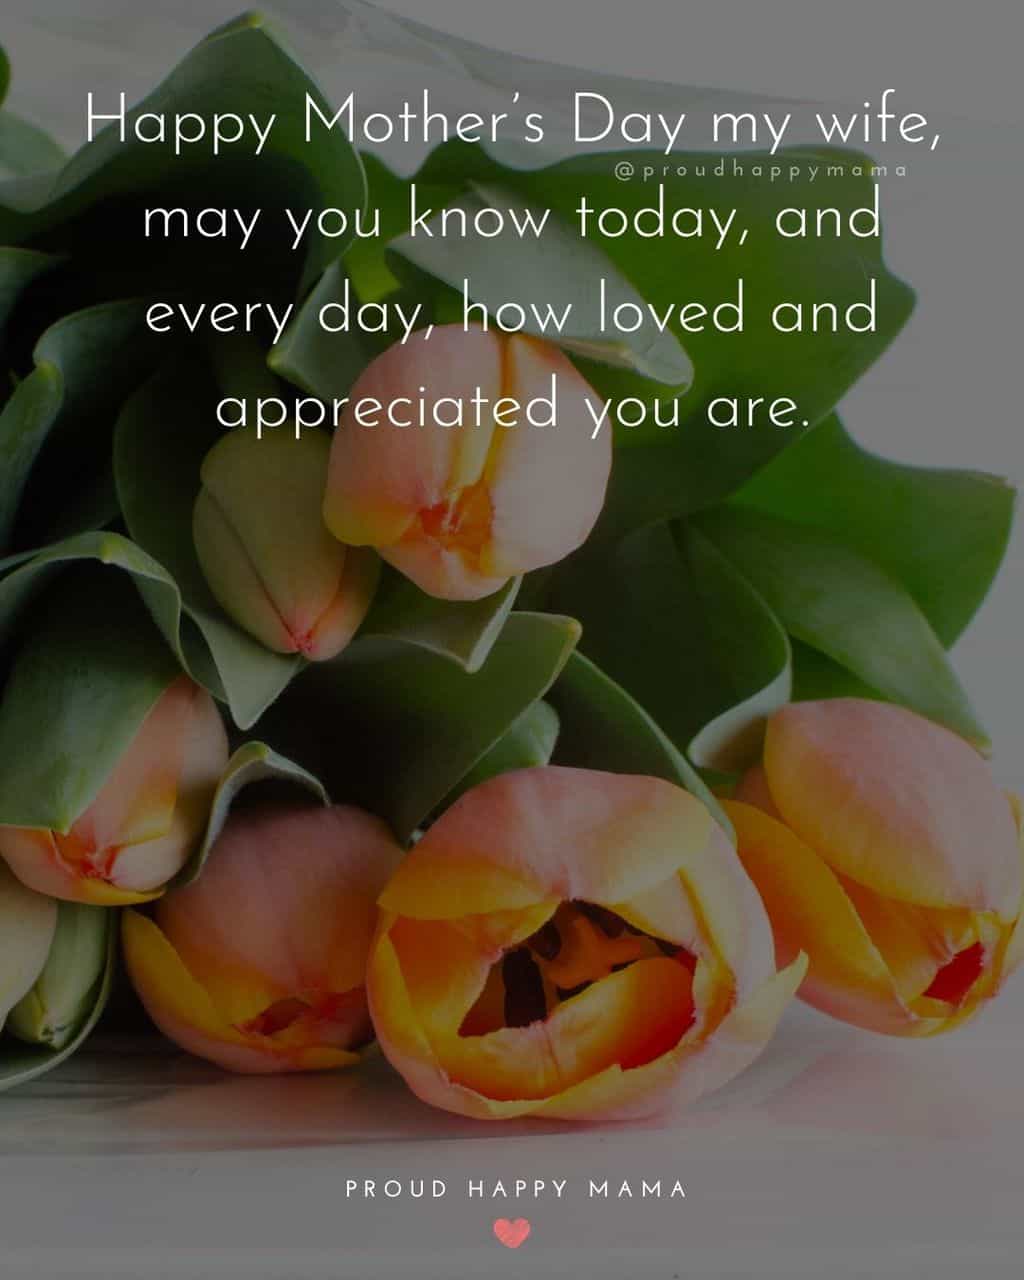 Happy Mothers Day Quotes For Wife - Happy Mother’s Day my wife, may you know today, and every day, how loved and